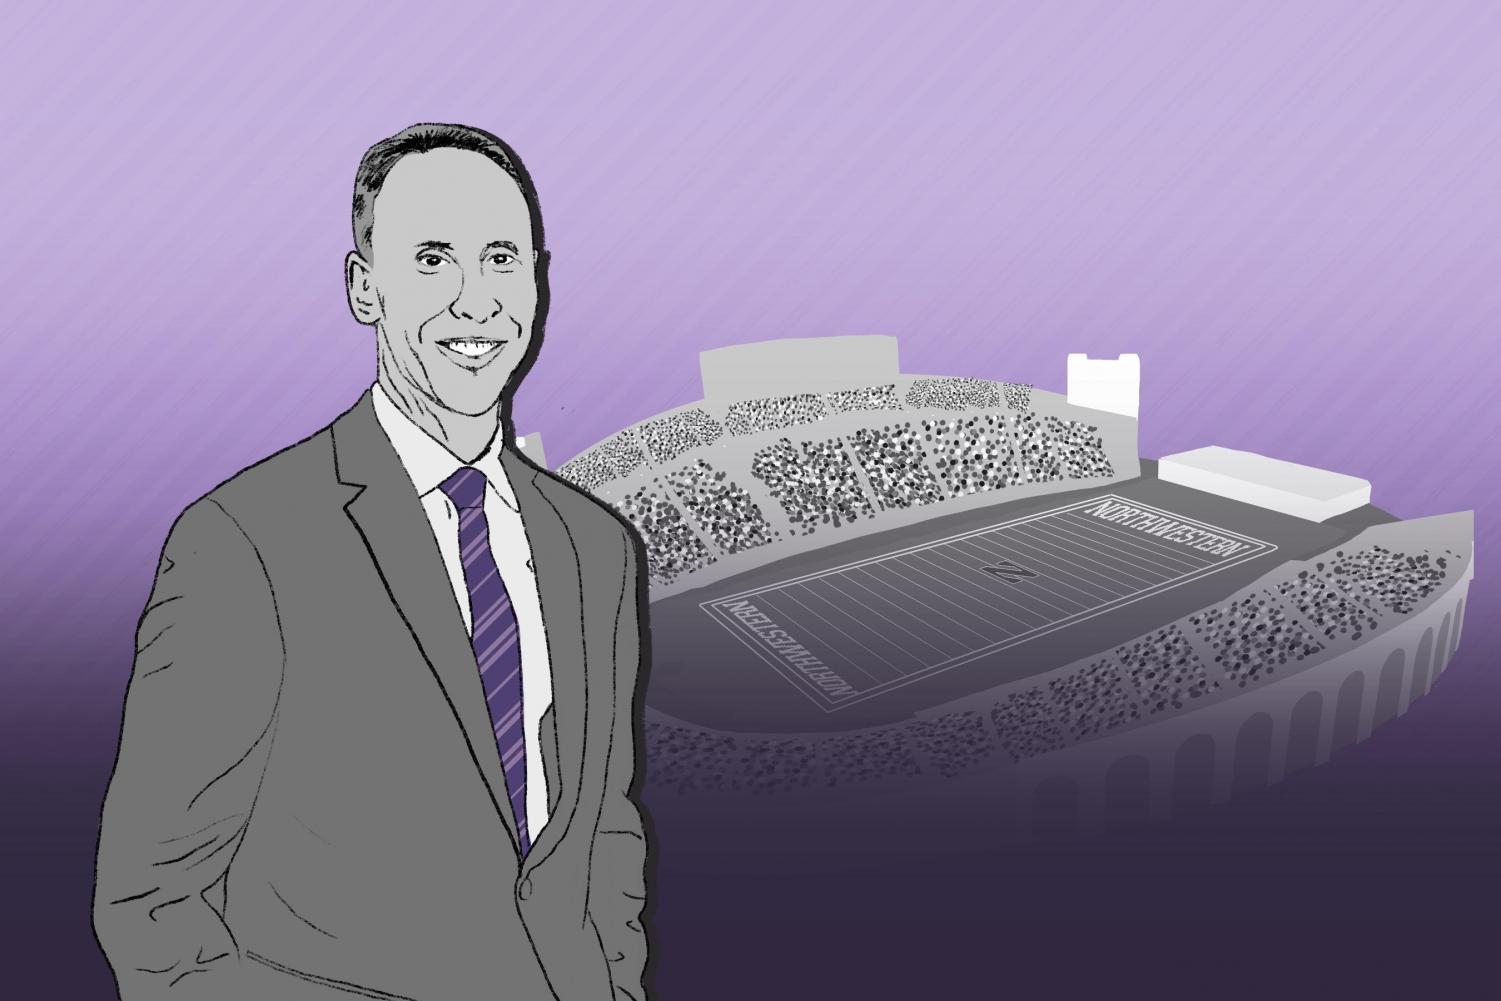 Mike+Polisky+stands+at+the+left+half+of+the+illustration%2C+in+black+and+white+except+for+a+purple+tie.+Behind+him+is+the+Northwestern+stadium+in+gray.+The+background+is+purple+with+darker+purple+stripes.